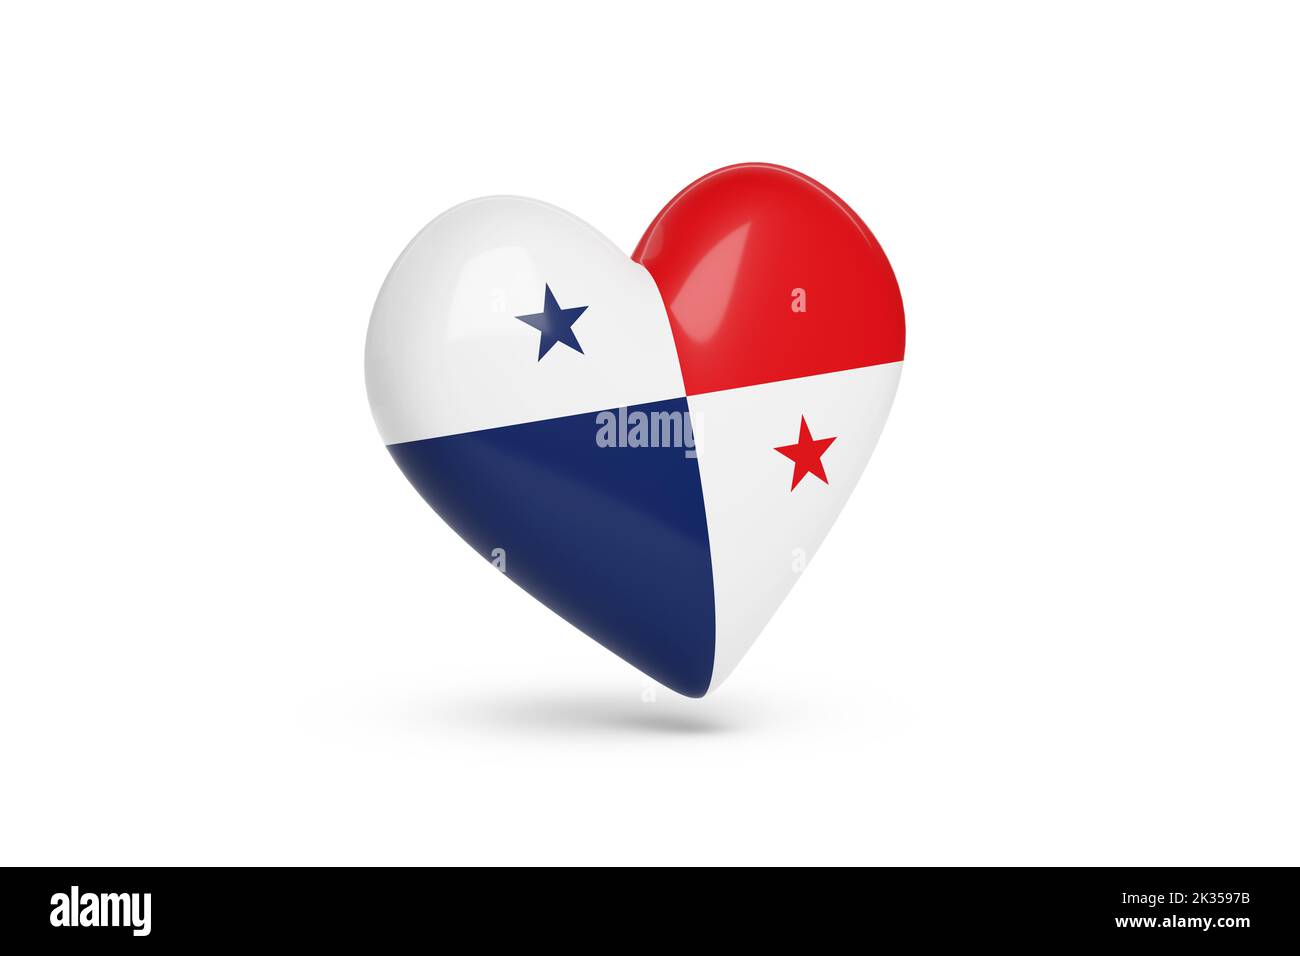 Heart with the colors of the flag of Panama isolated on white background. 3d illustration. Stock Photo